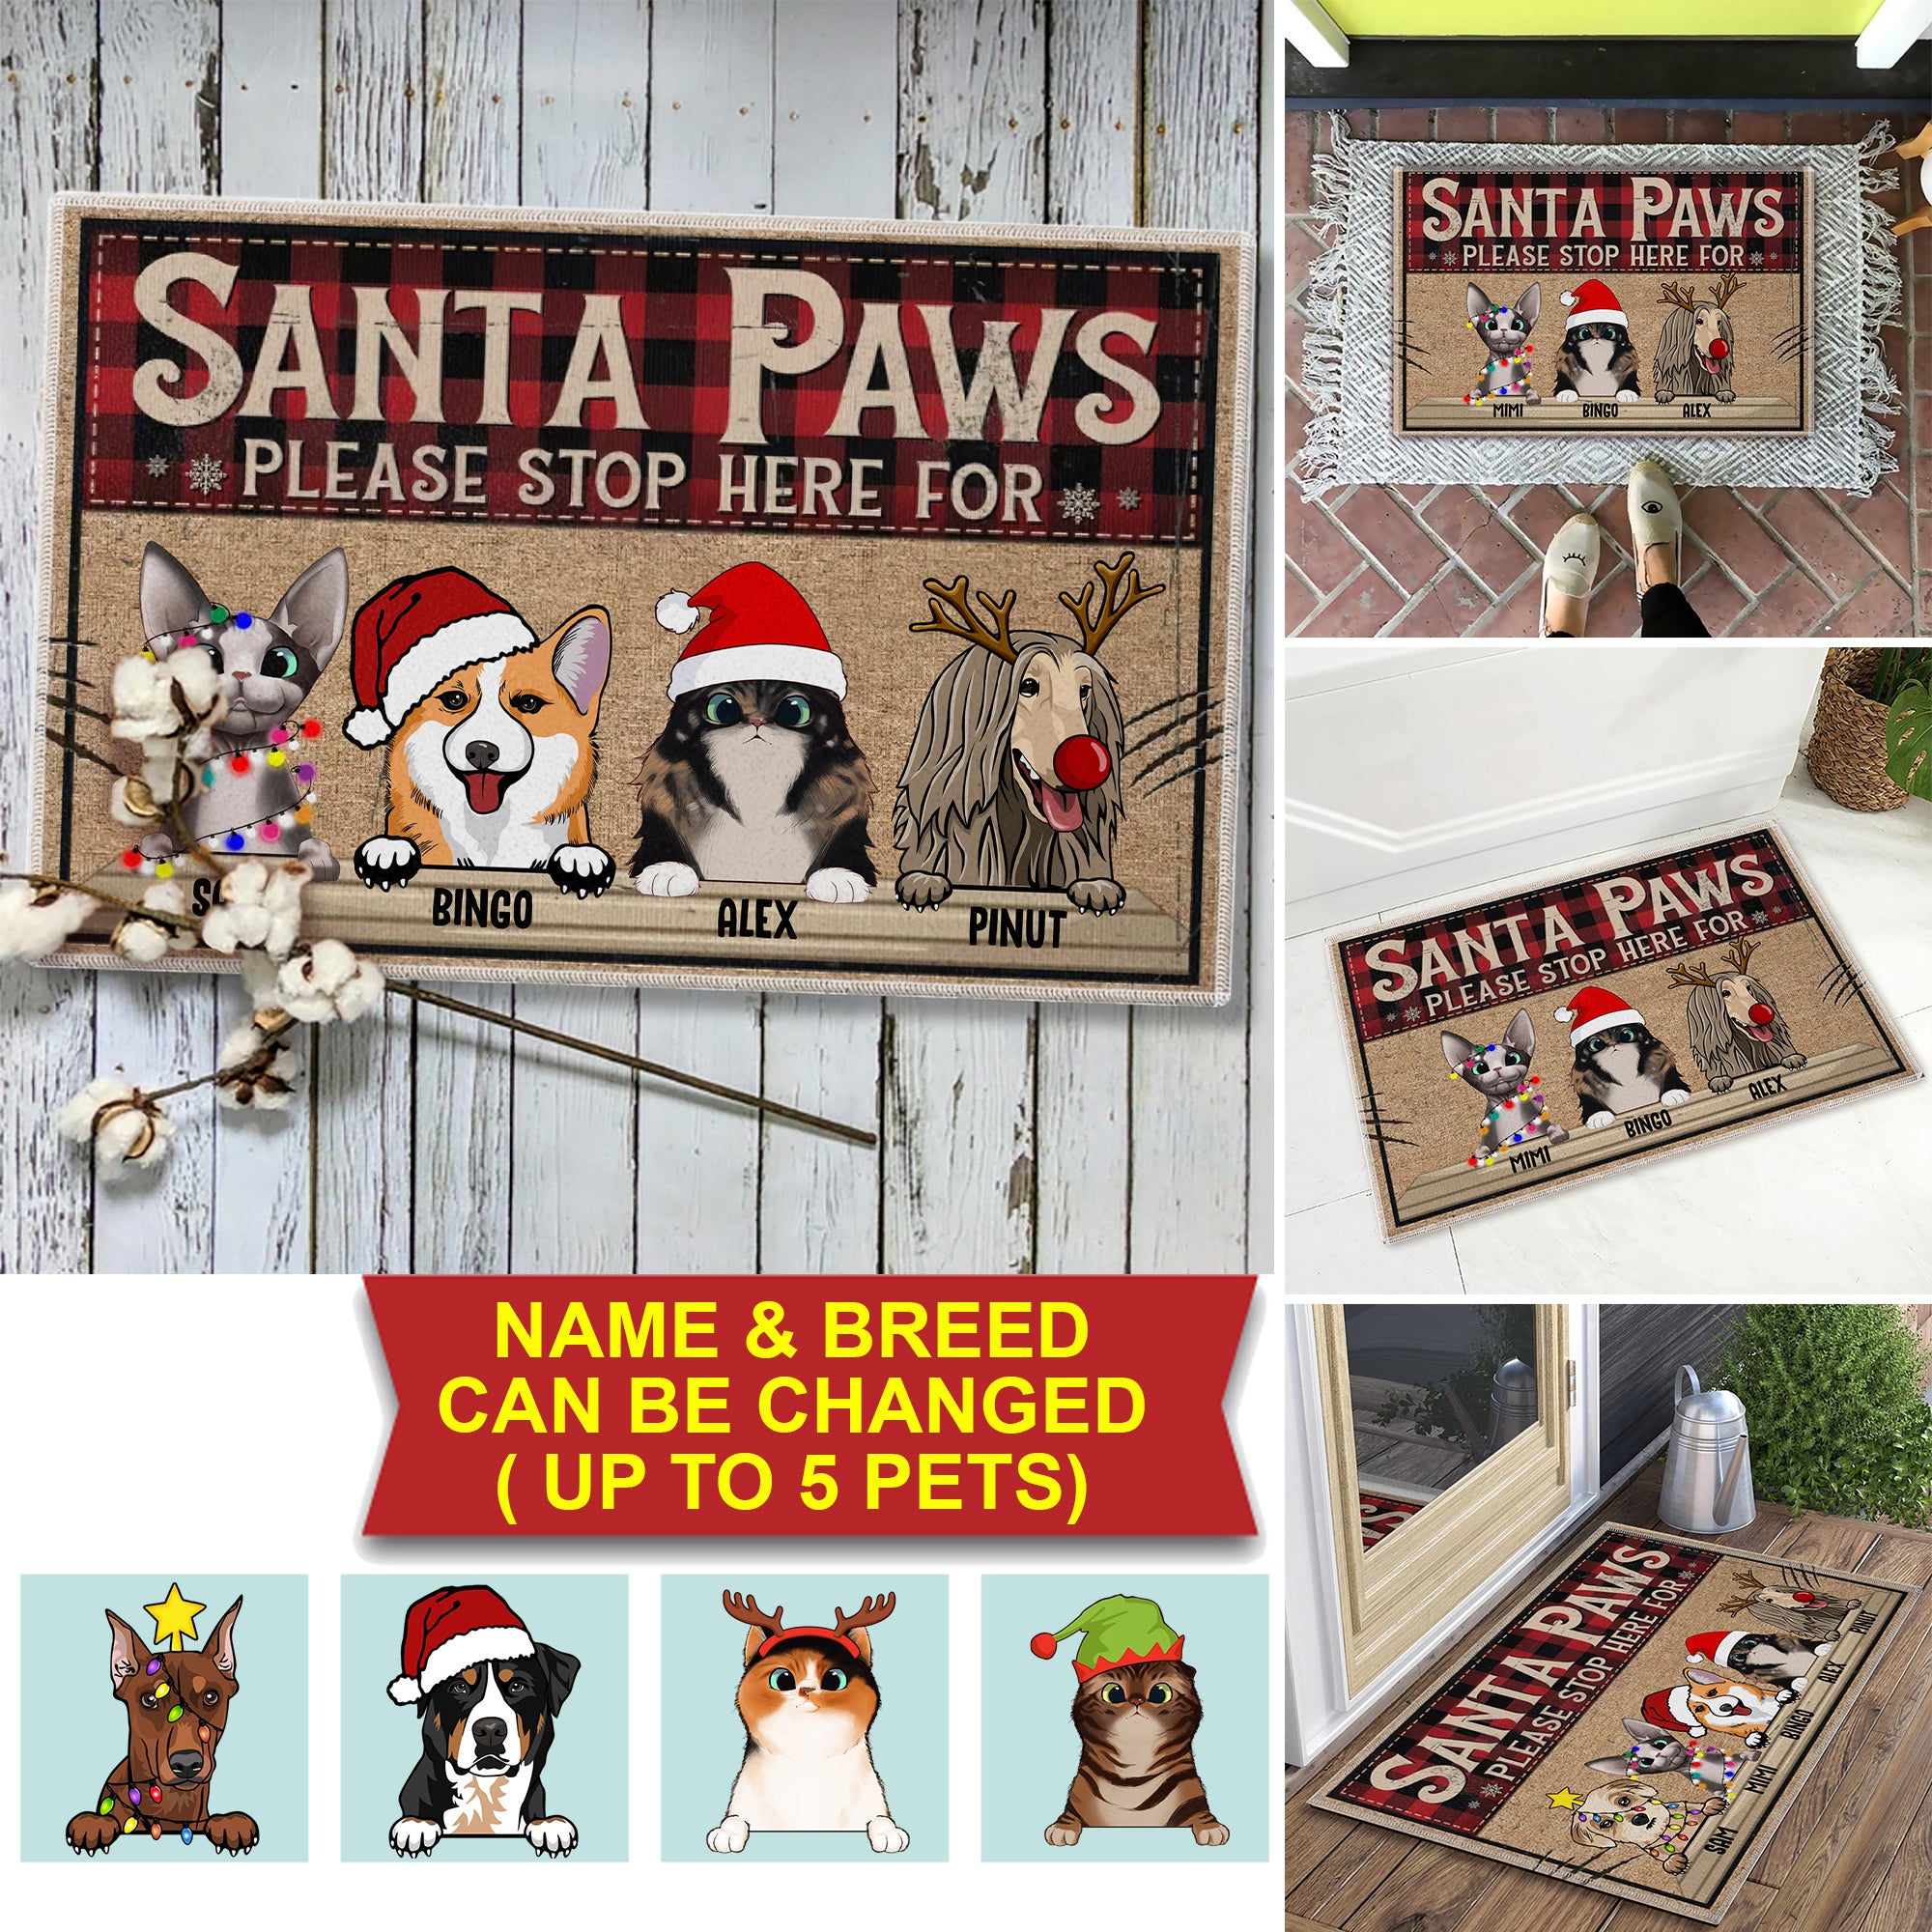 Santa Paws Please Here For  - Custom Pets And Names - Personalized Doormat - Pet Lover Gift, Christmas Decor